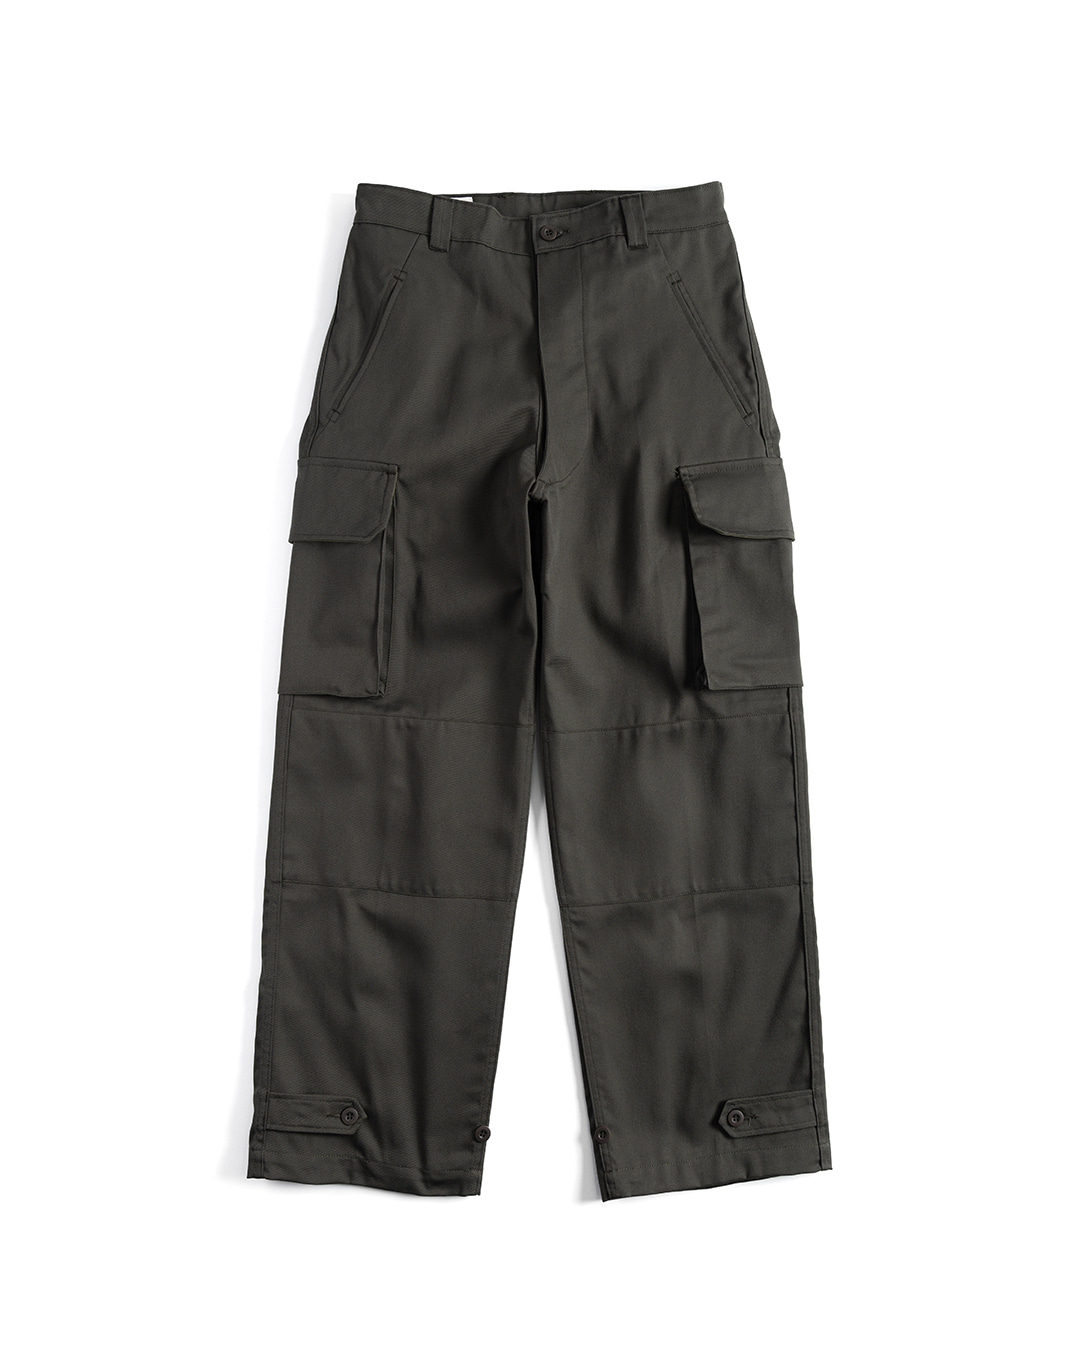 FRENCH ARMY M-47 PANTS (olive green)